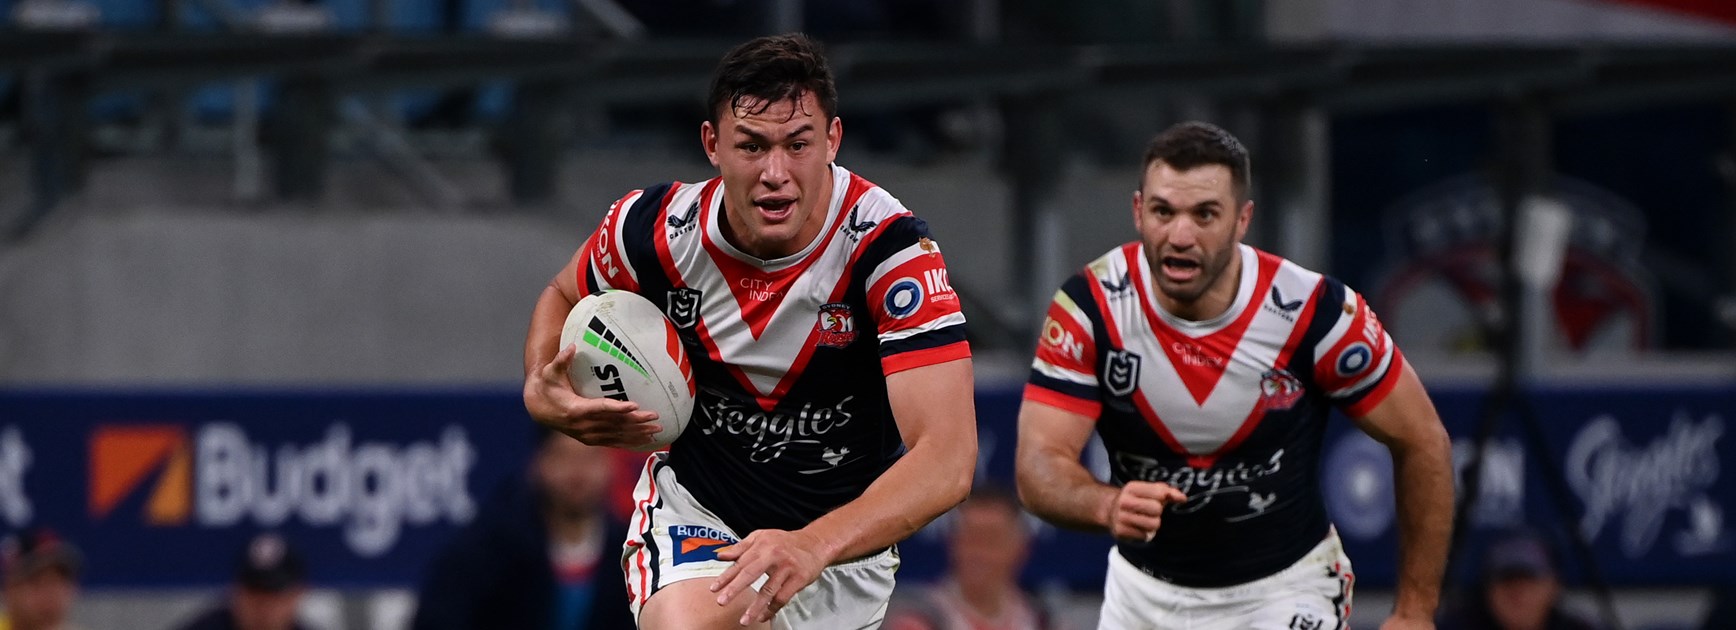 Roosters Unable to Overcome Raiders Despite Strong Second Half Showing